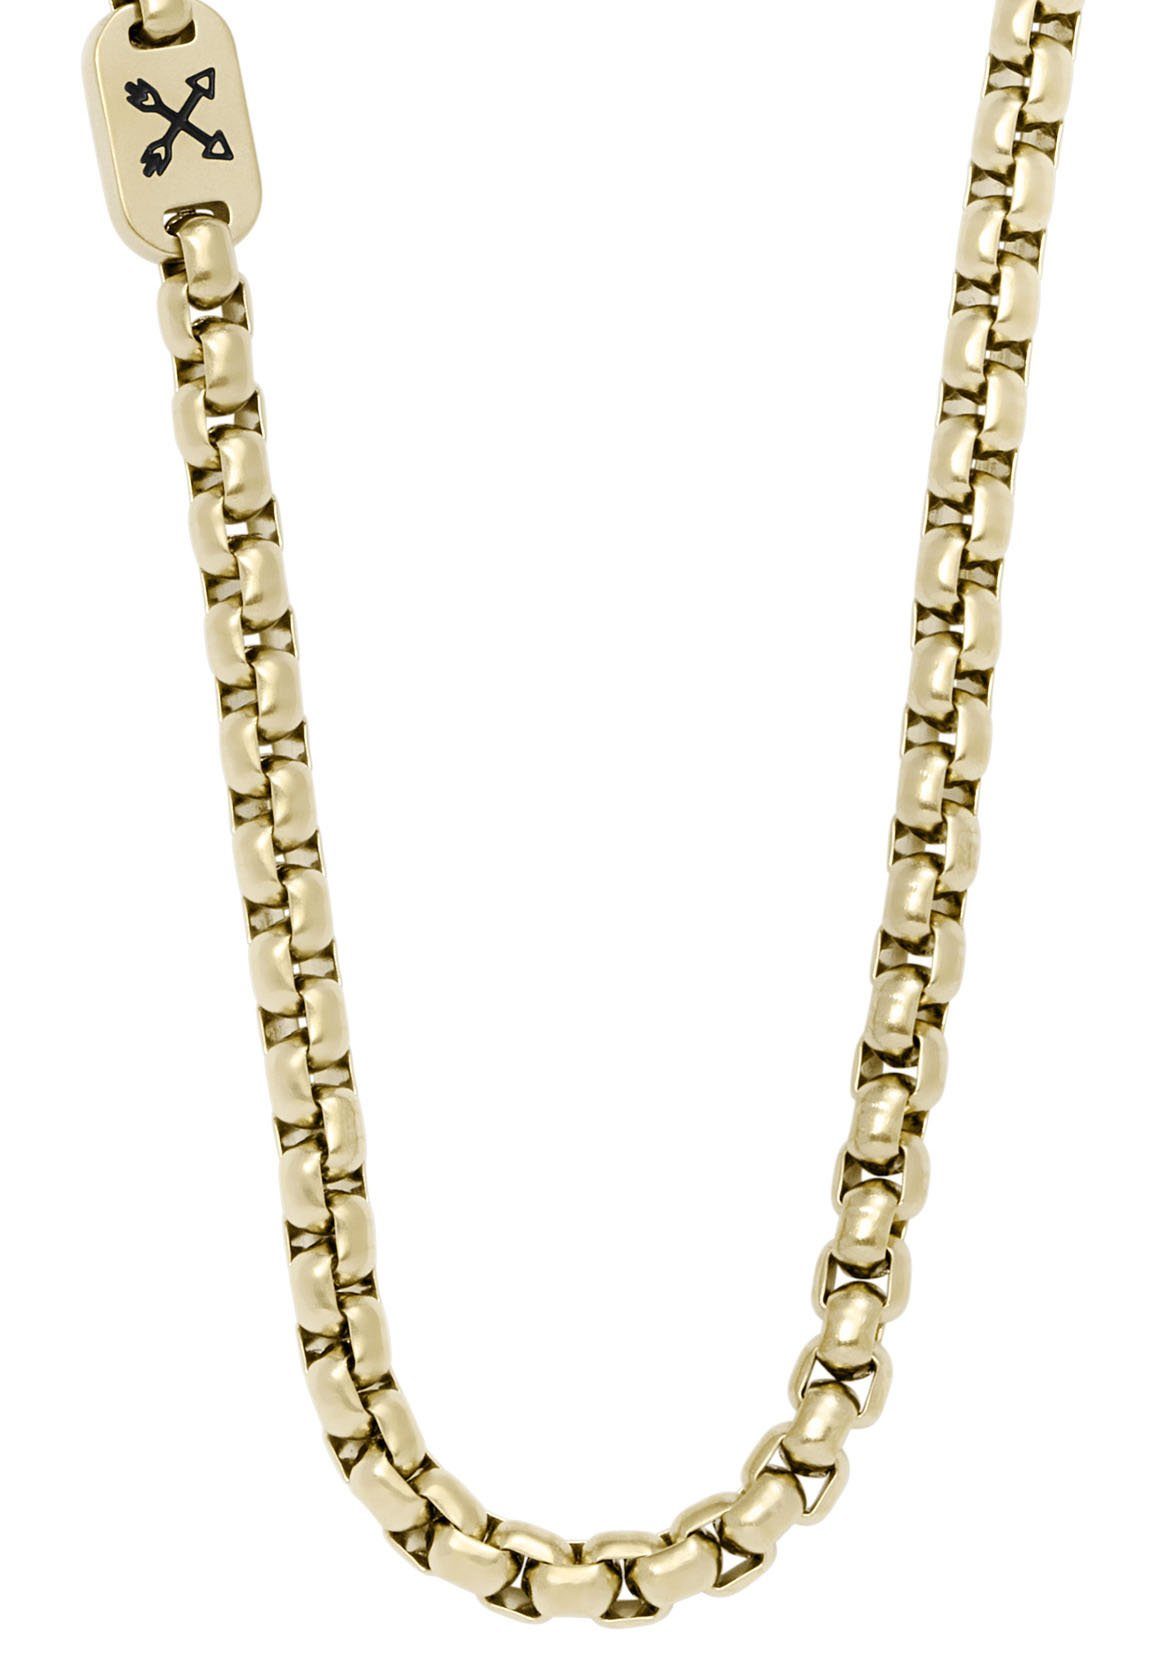 JF04336040, Fossil JF04337710 gelbgoldfarben JEWELRY, Edelstahlkette